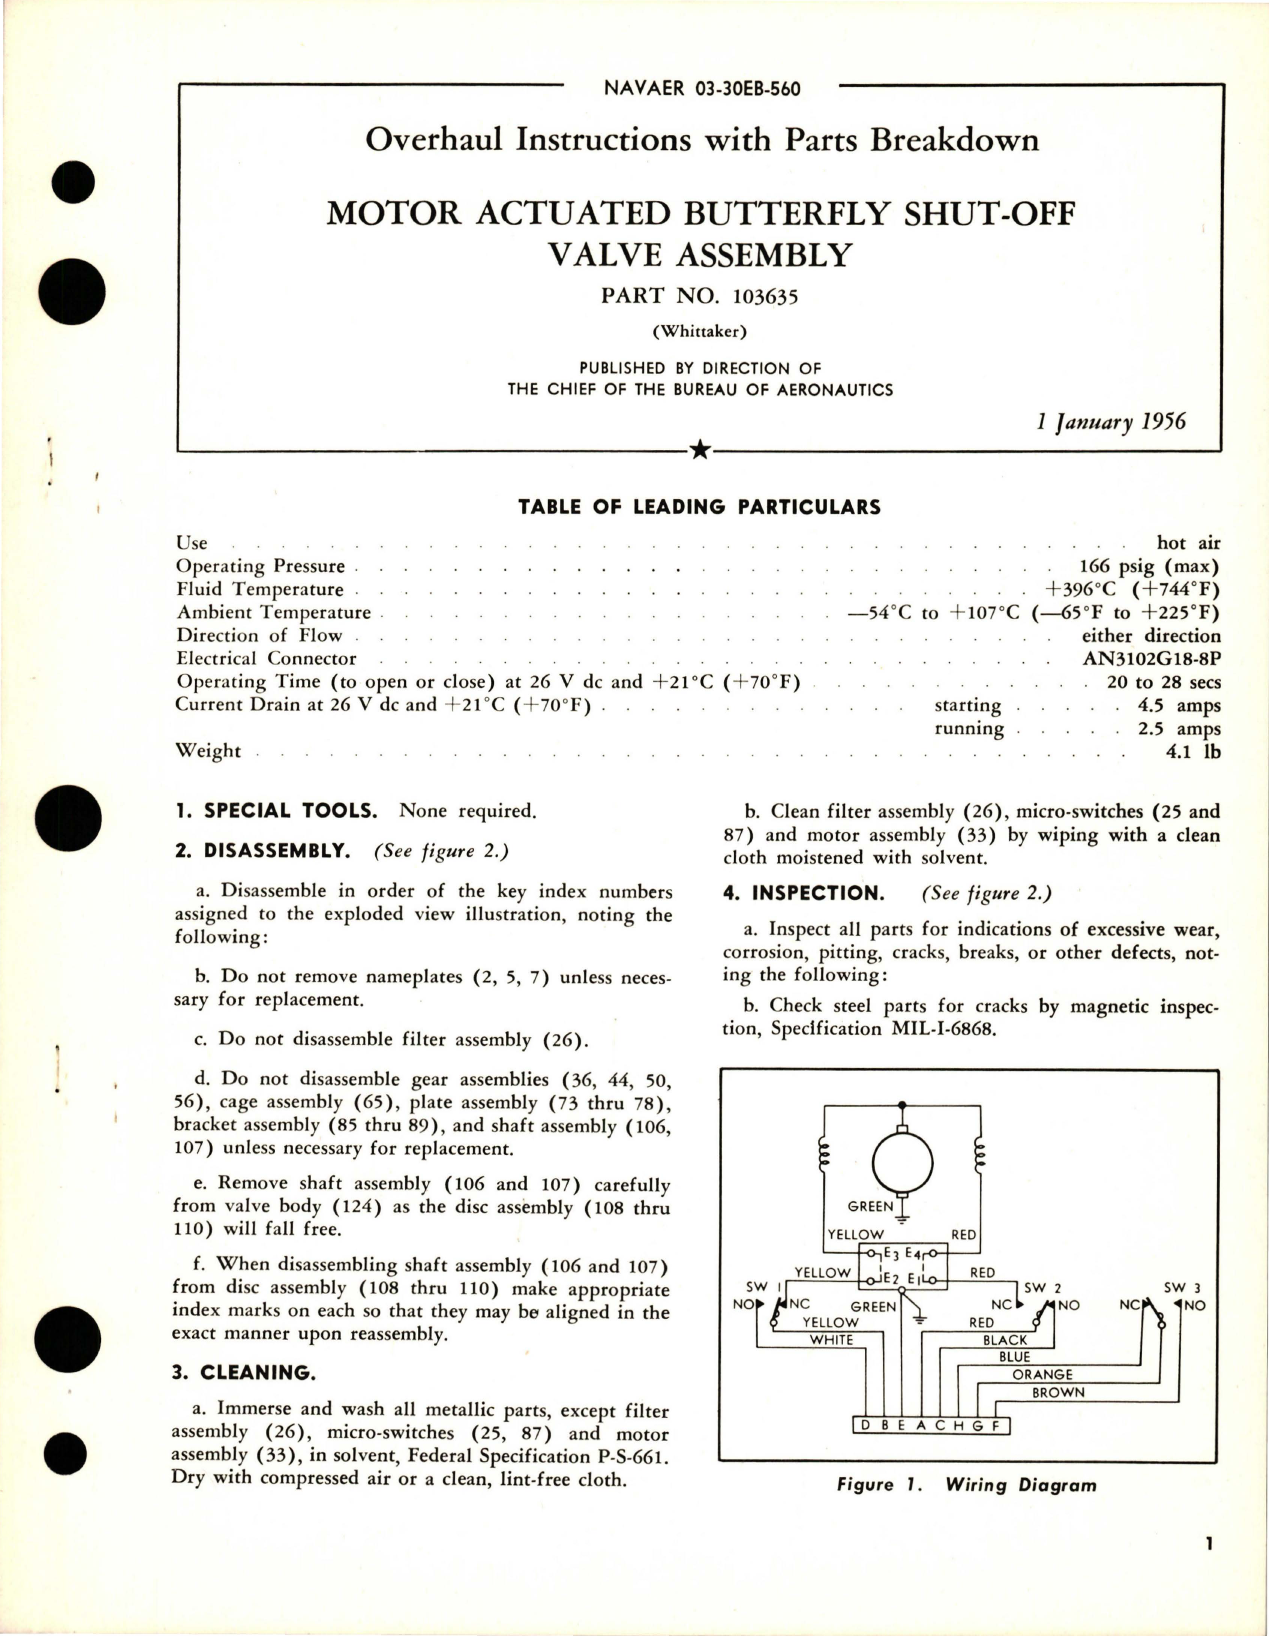 Sample page 1 from AirCorps Library document: Overhaul Instructions with Parts for Motor Actuated Butterfly Shut Off Valve Assembly - Part 103635